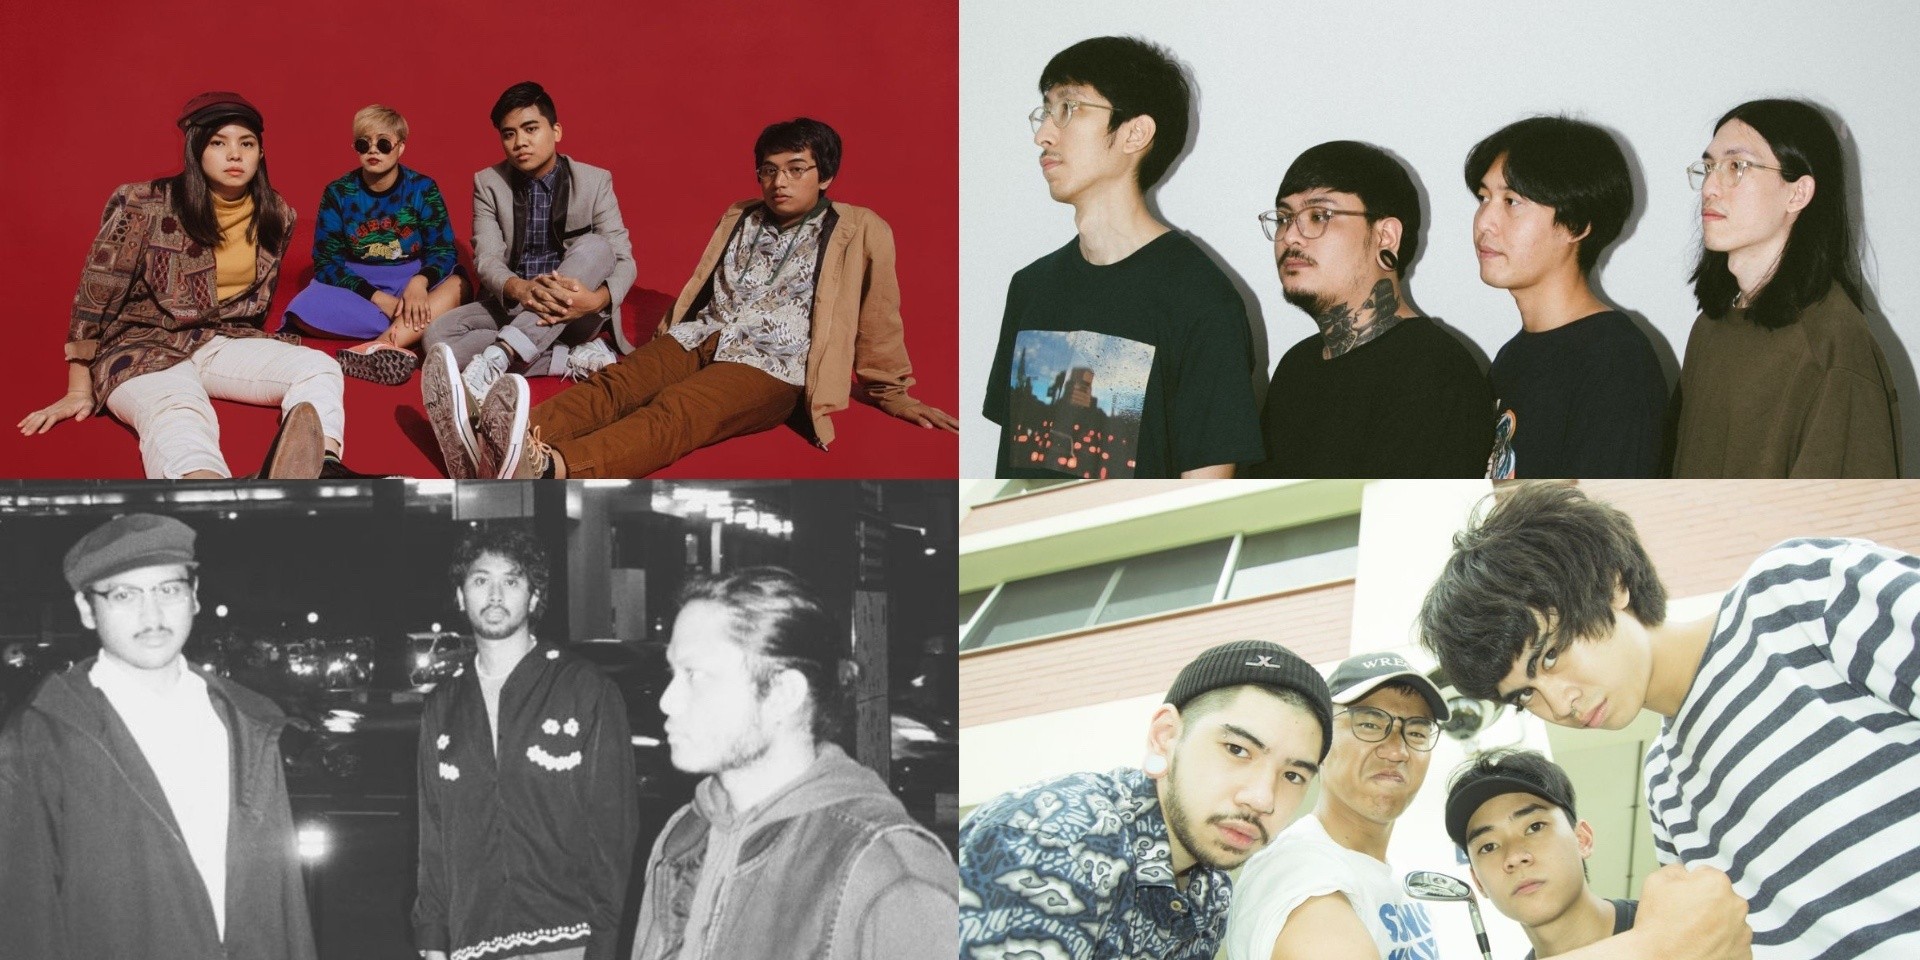 Oh, Flamingo!, FOLK9, Polka Wars, Carpet Golf, and more to perform at Esplanade's 'Rocking The Region' in Singapore this June